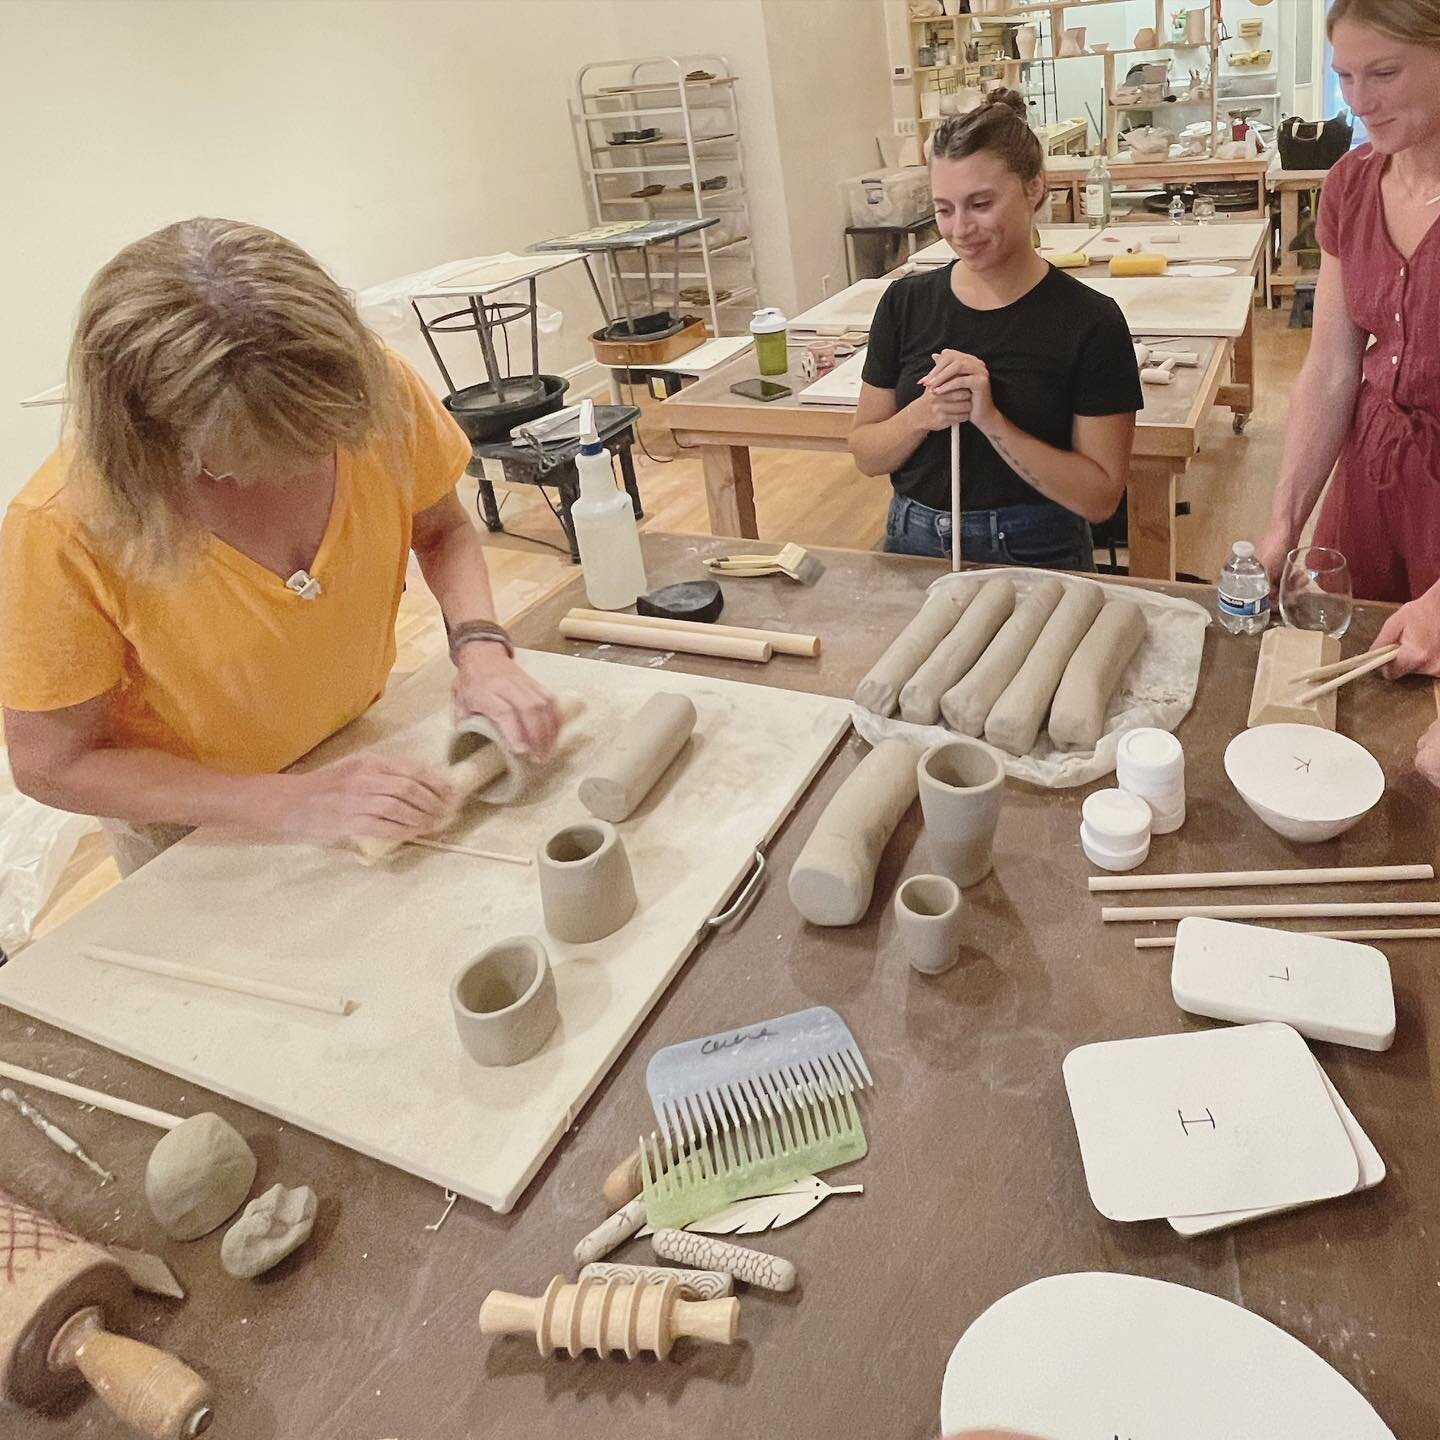 Our workshops are almost filled for August! Join us for &ldquo;Trusting the process&rdquo; this Wednesday and work collaboratively to create a group sculpture as well as creating other inspirational works of art. We hope to see you there. Click the l